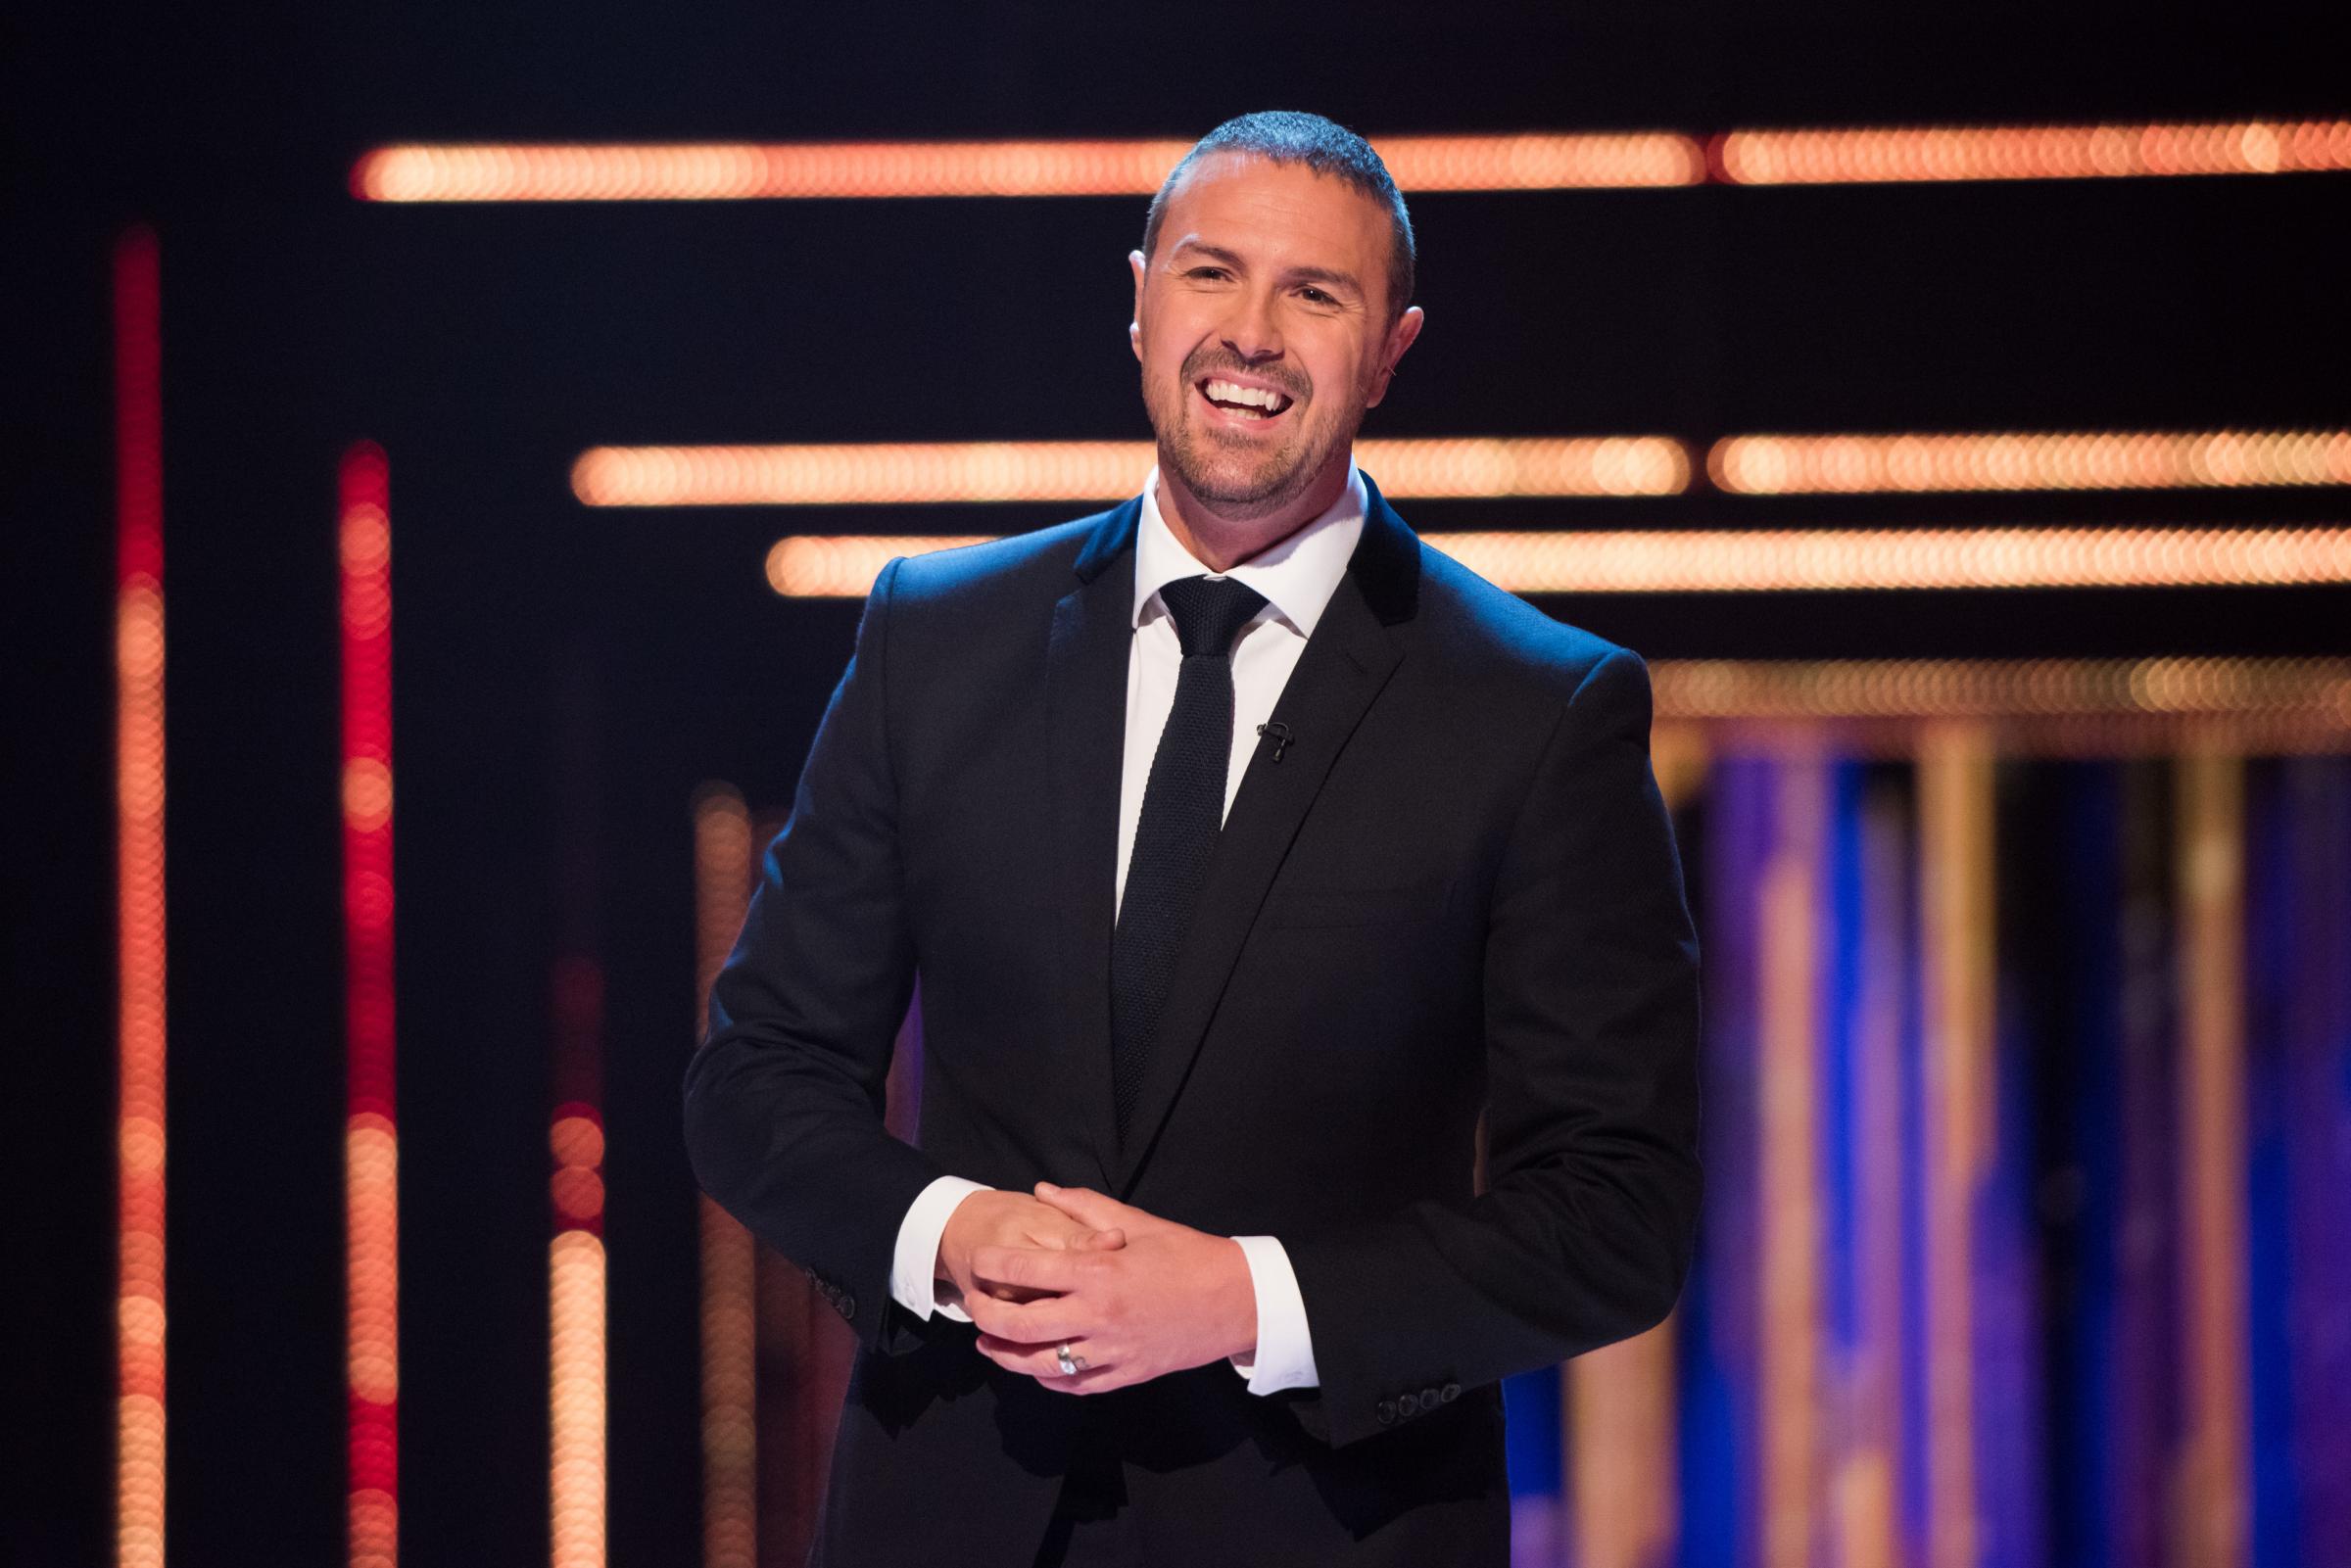 Paddy McGuinness reveals he was 12 when he first drove on public roads